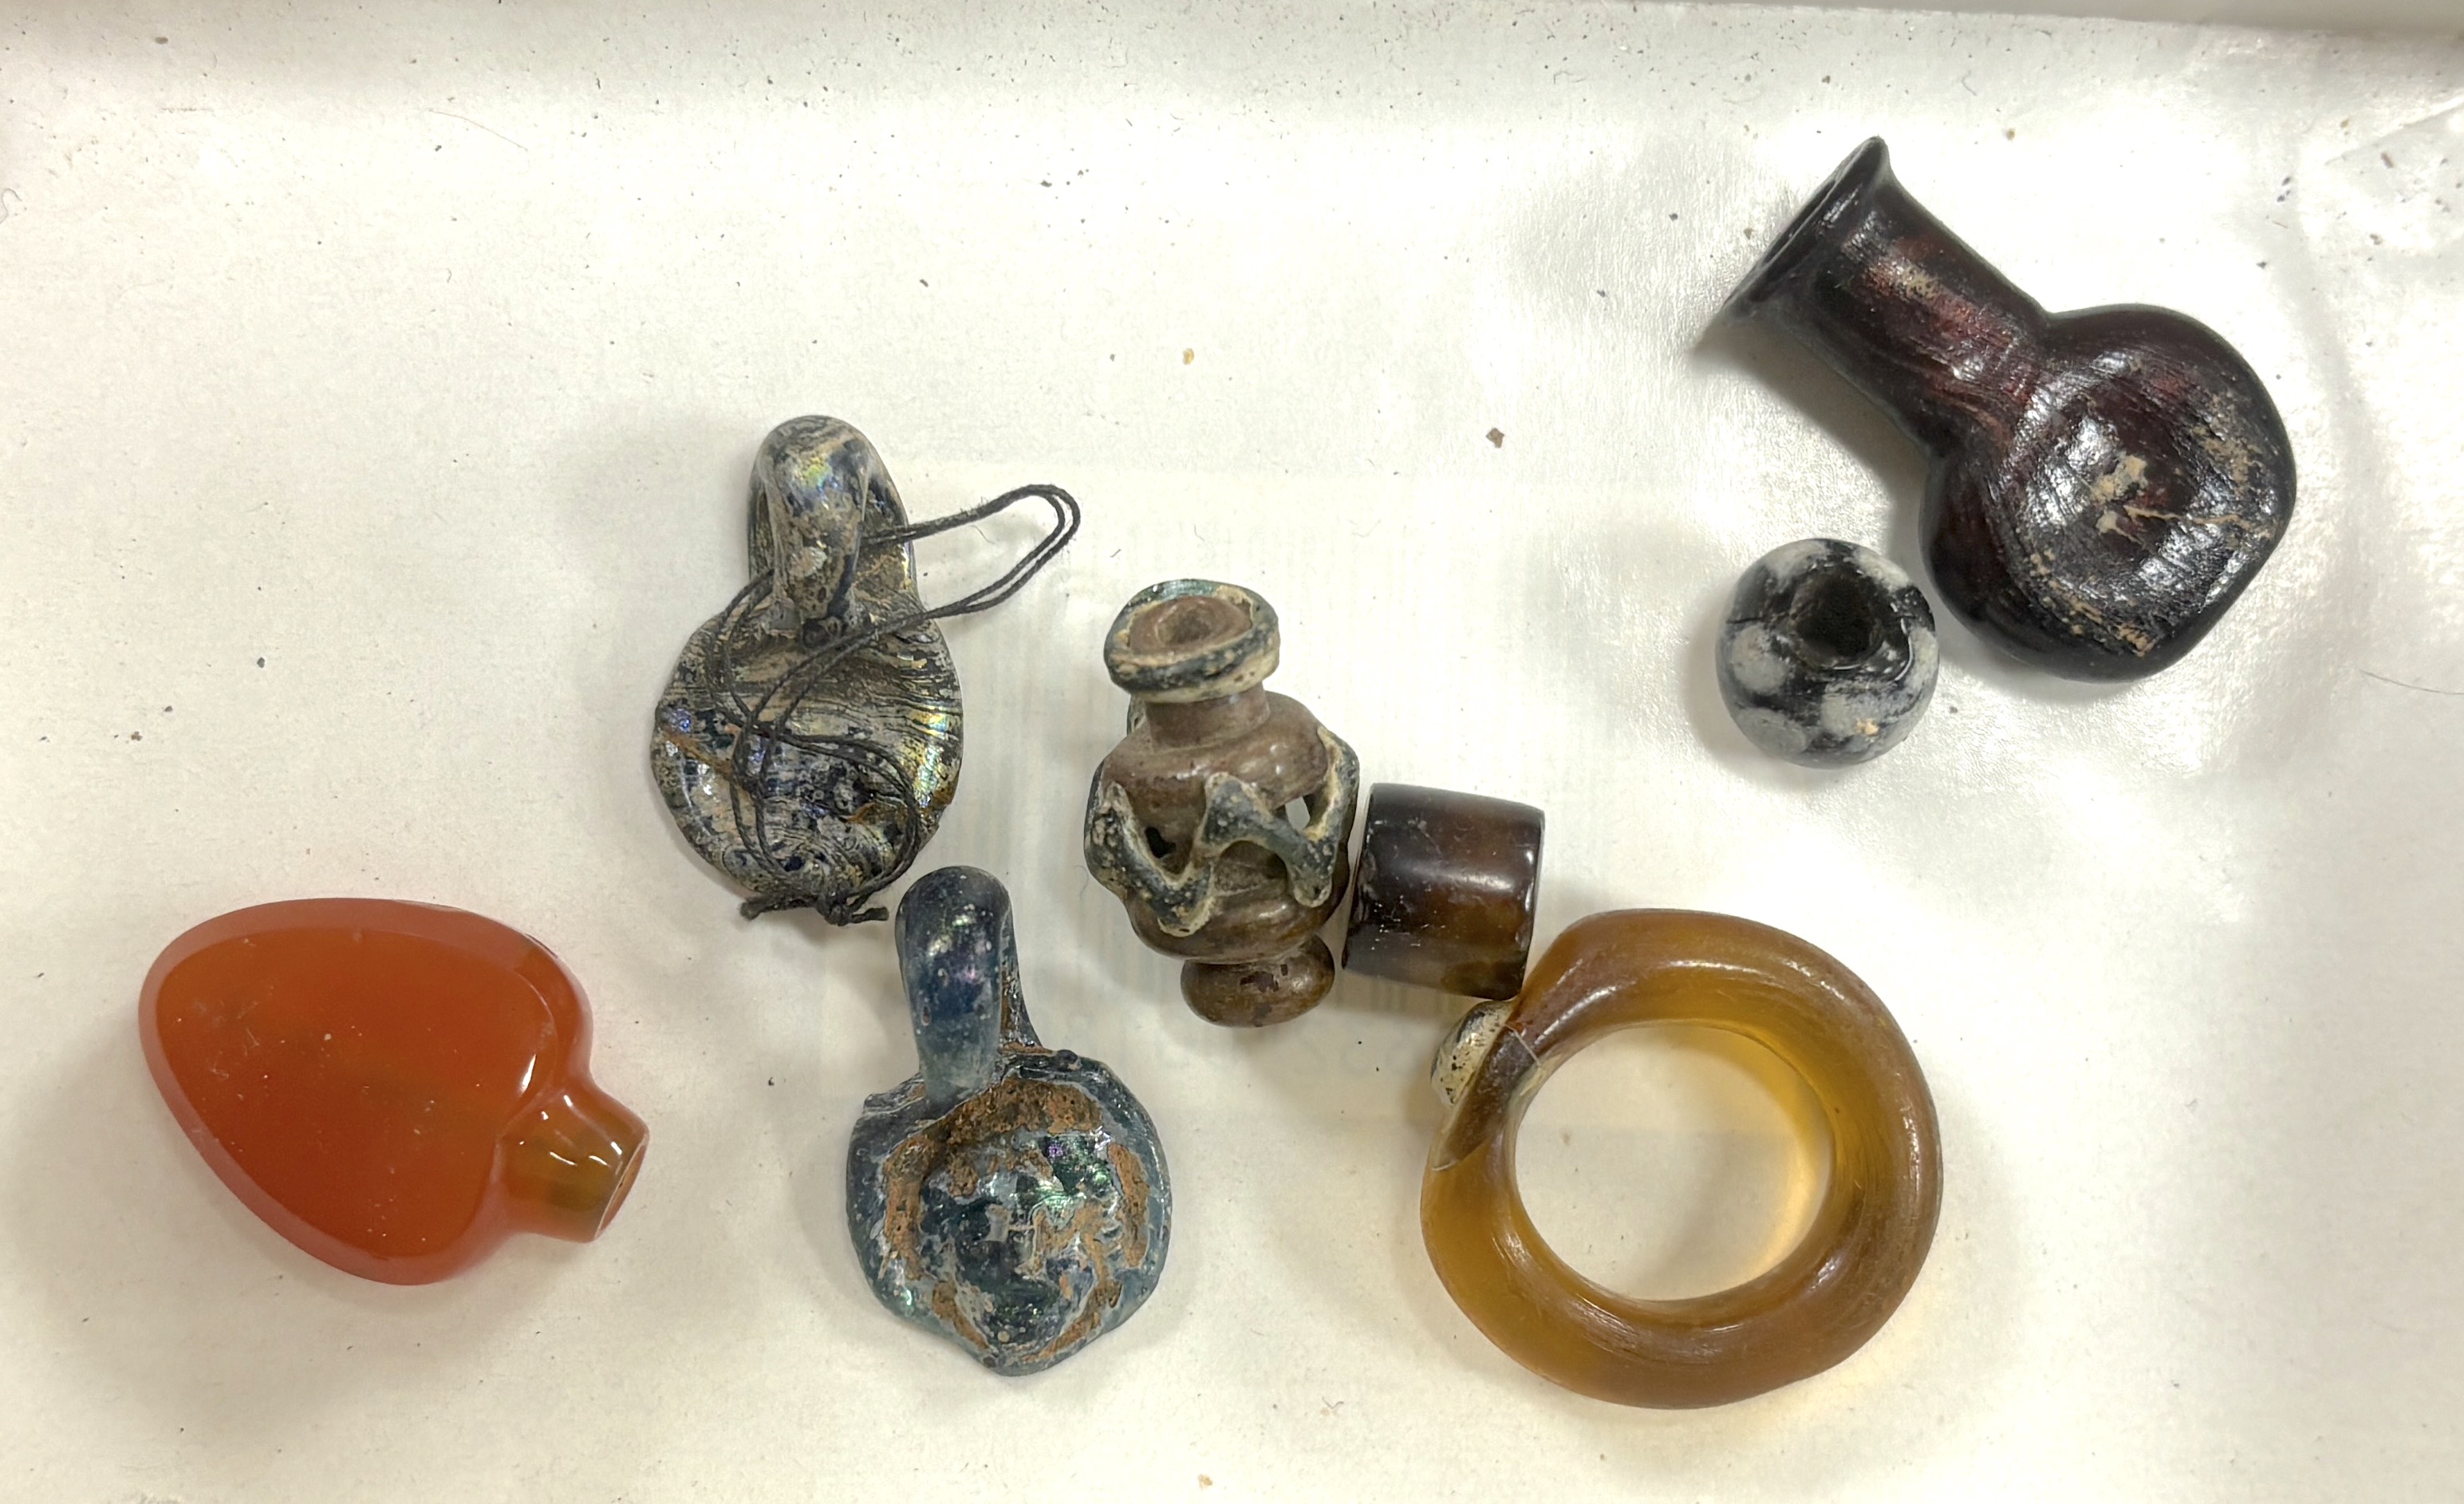 Miniature antiquities, including glass beads and miniature vessels, some possibly thought to be Roman                                                                                                                       